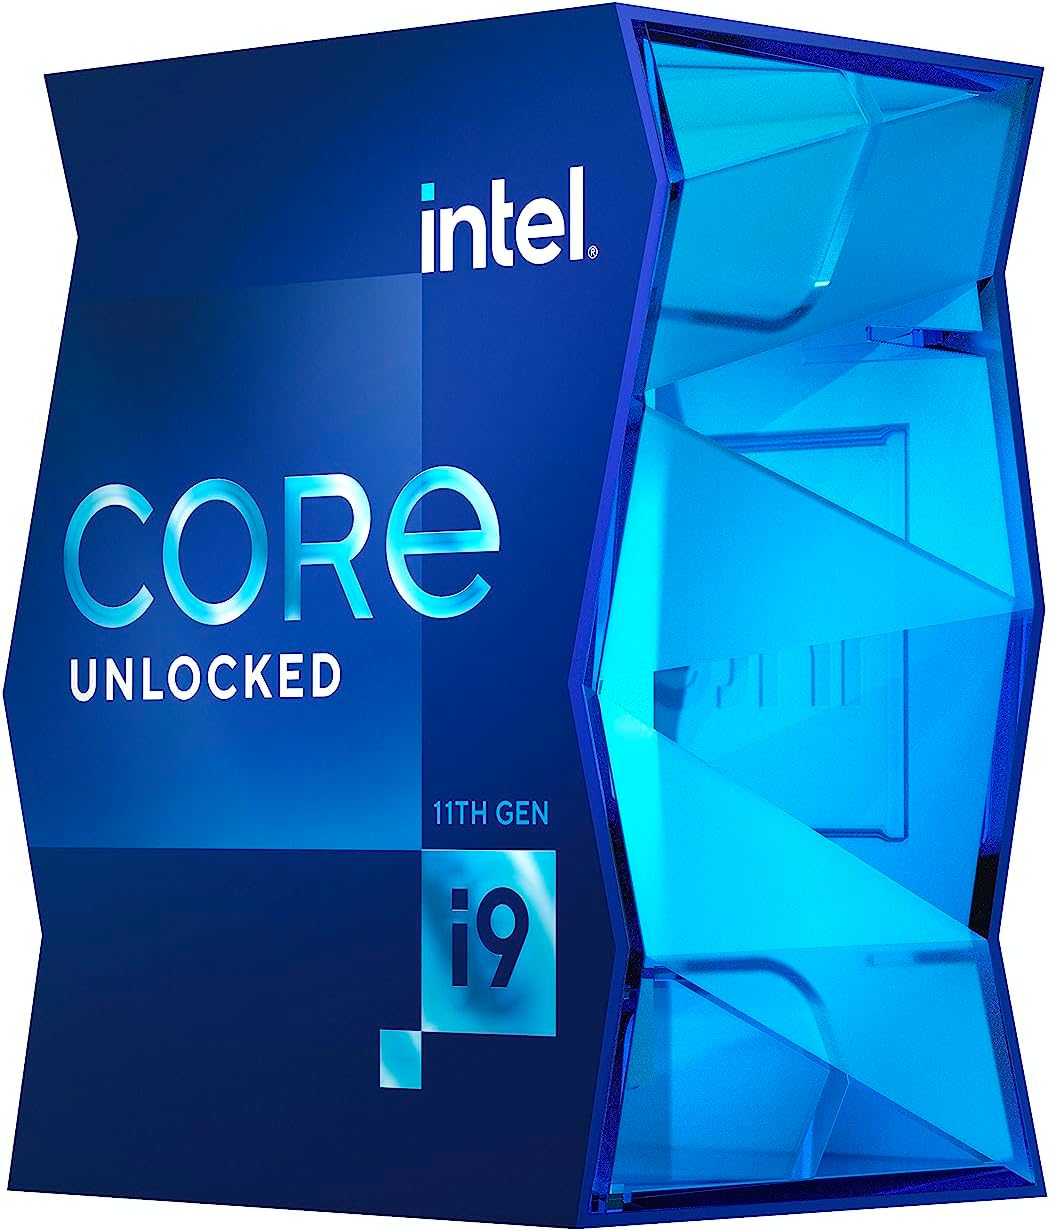 High-performance Intel Core i9-11900K processor with 6/12 cores/threads 675901933735D